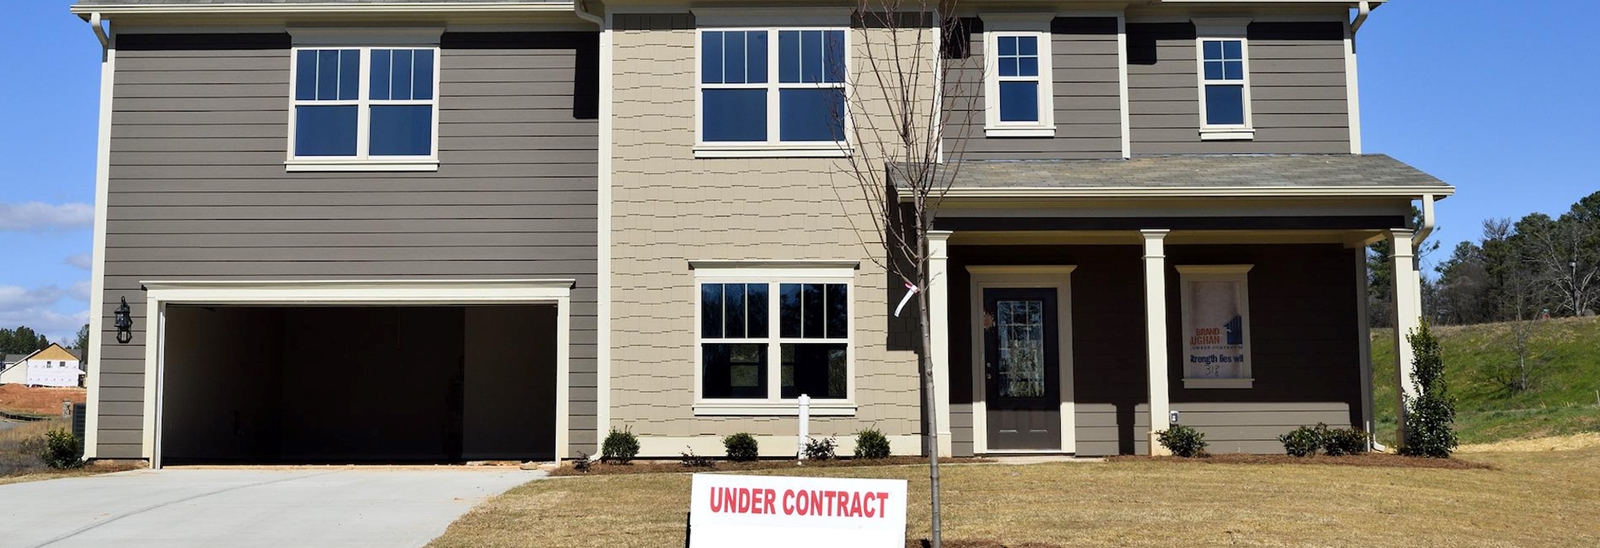 house under contract